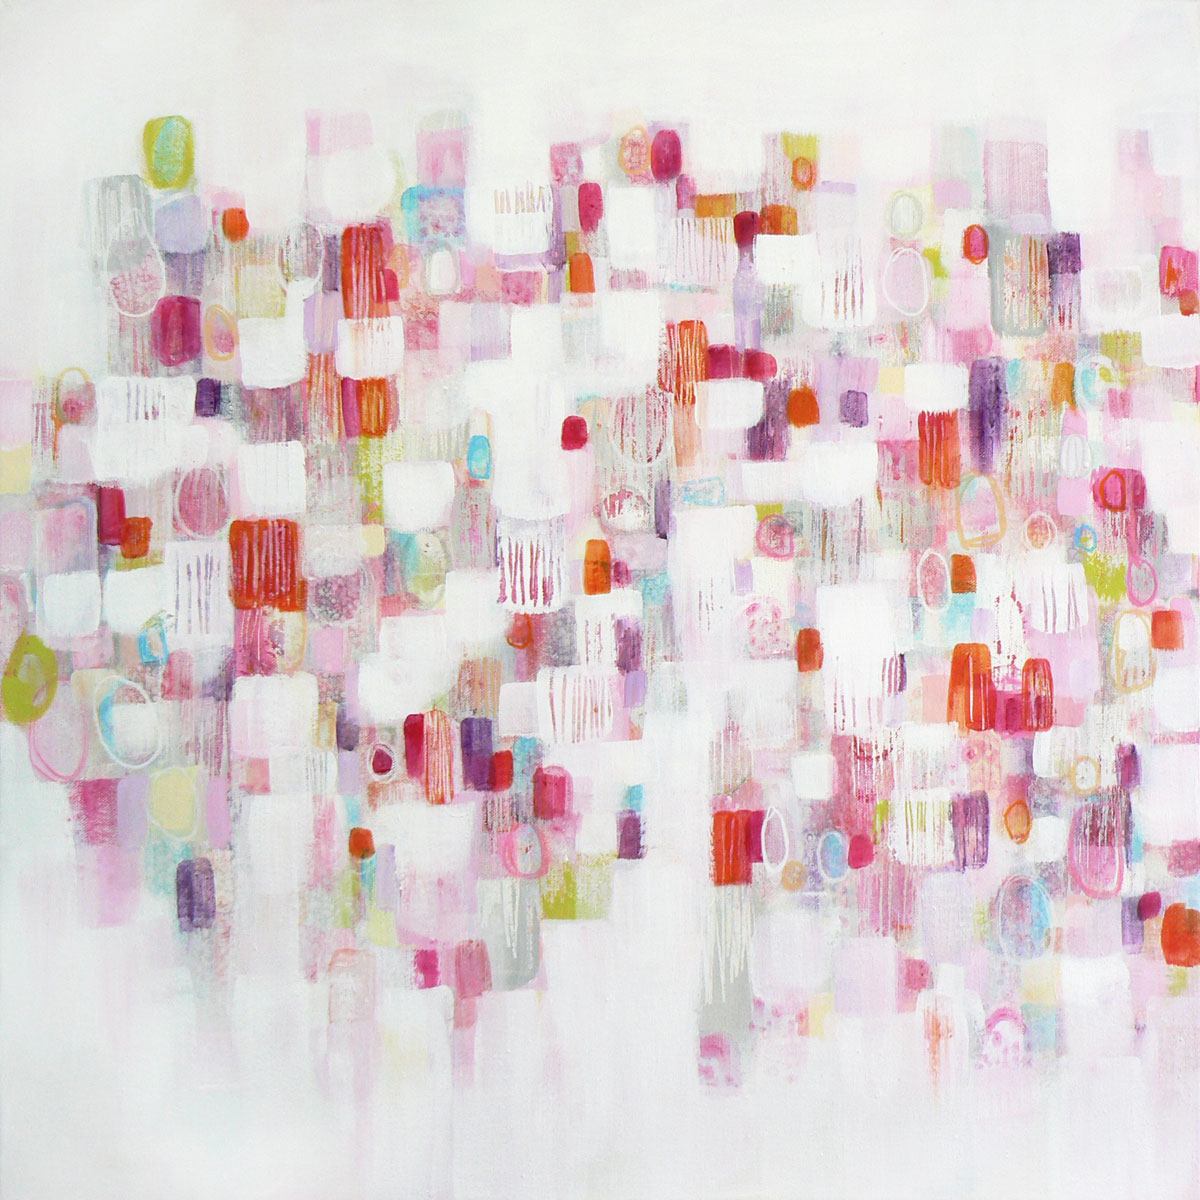 Elements, 2015 Acrylic painting by Carolynne Coulson